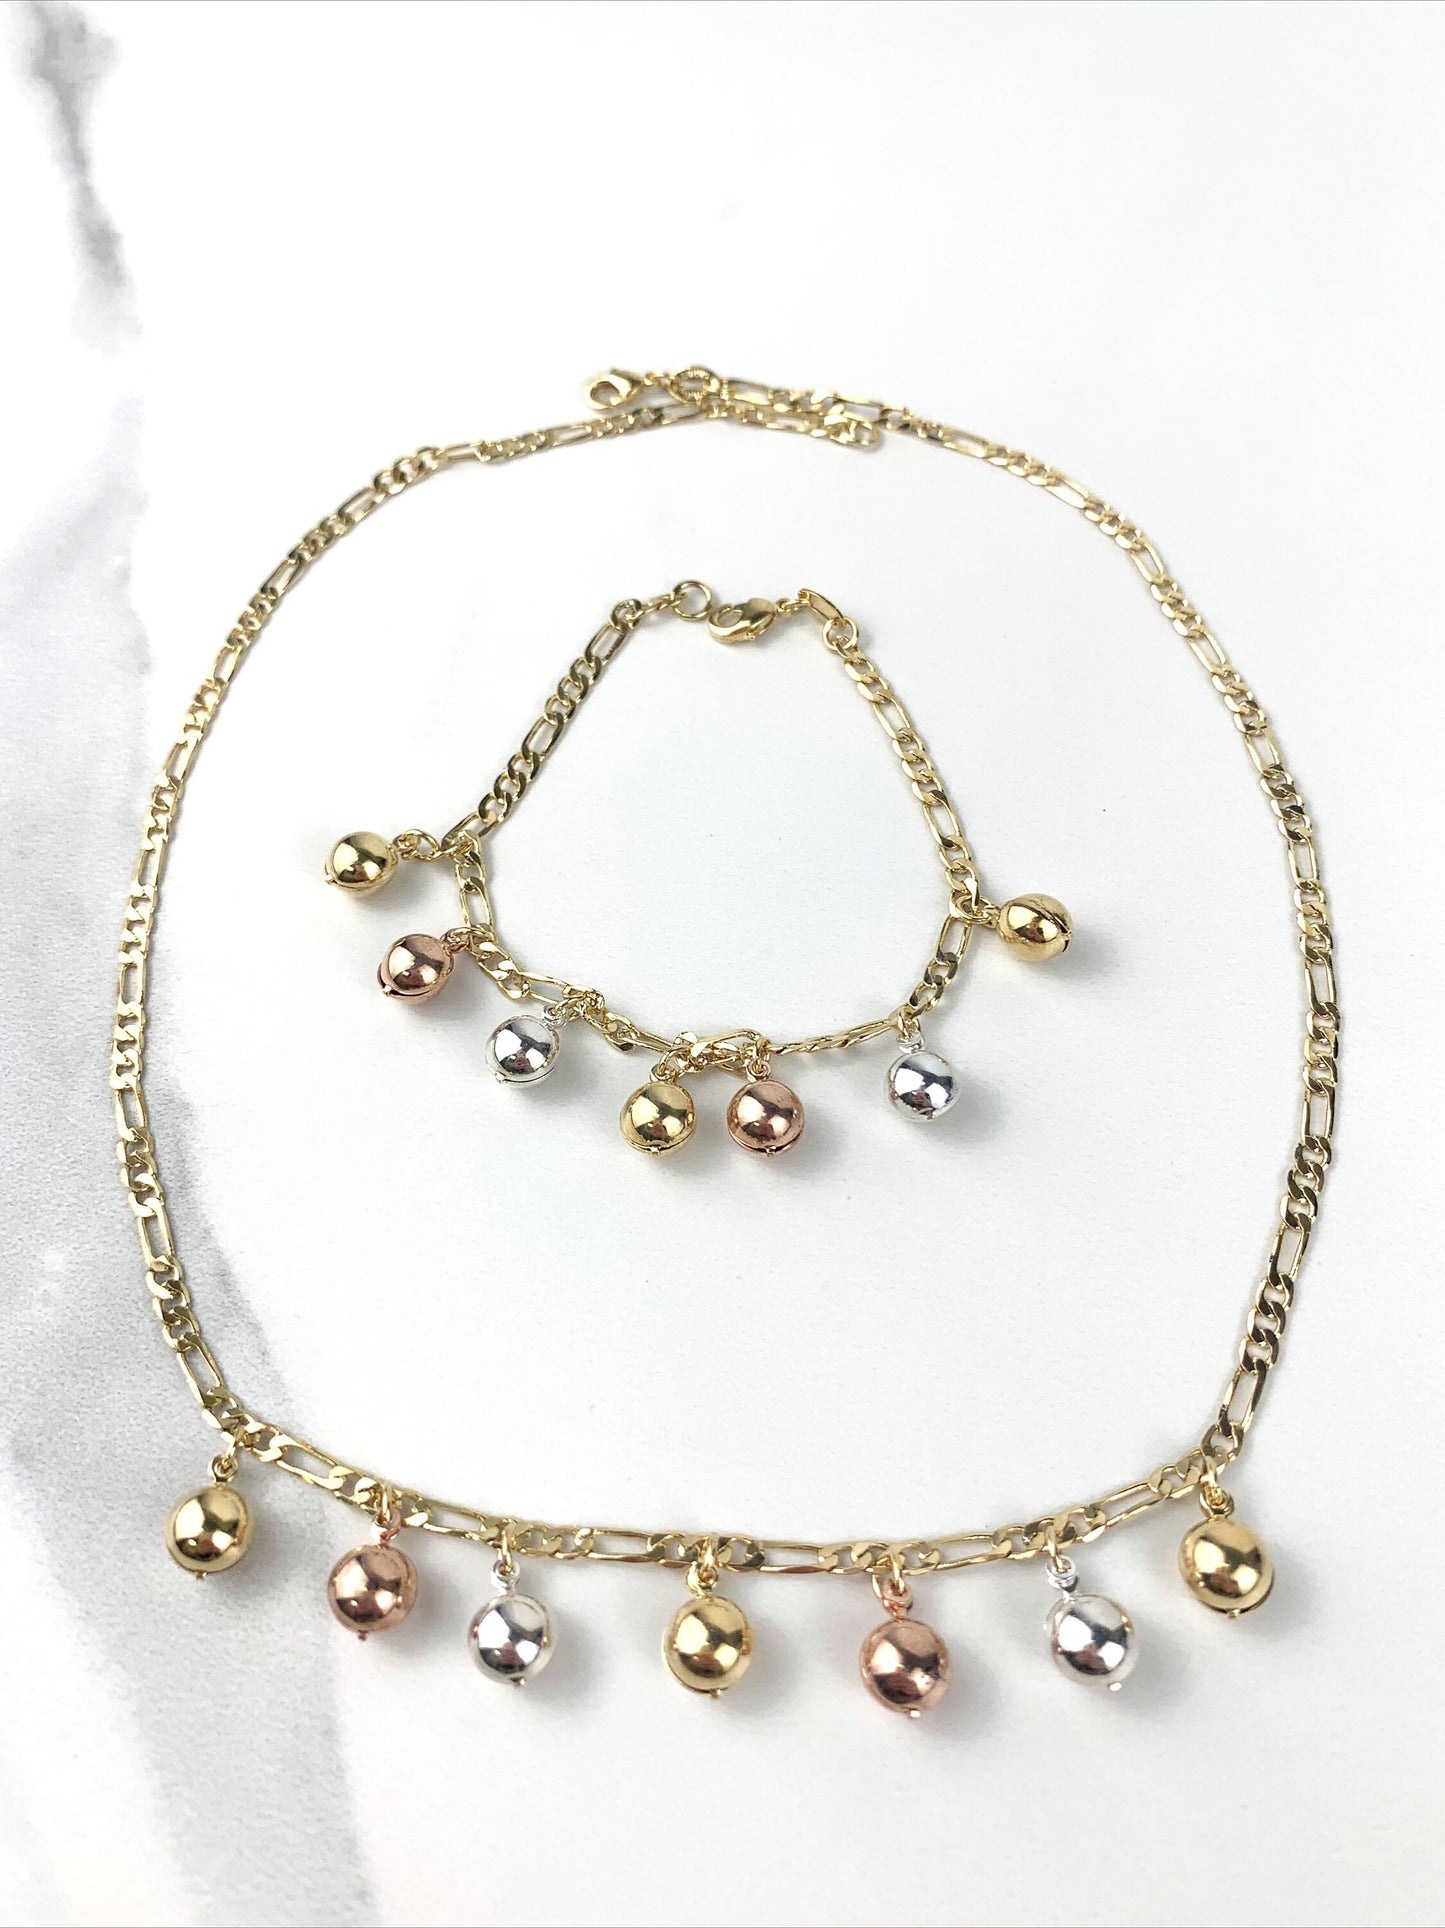 18k Gold Filled, Tinkle Bell Choker and Bracelet There Tones Gold, White Gold and Pink Gold Wholesale Jewelry Supplies